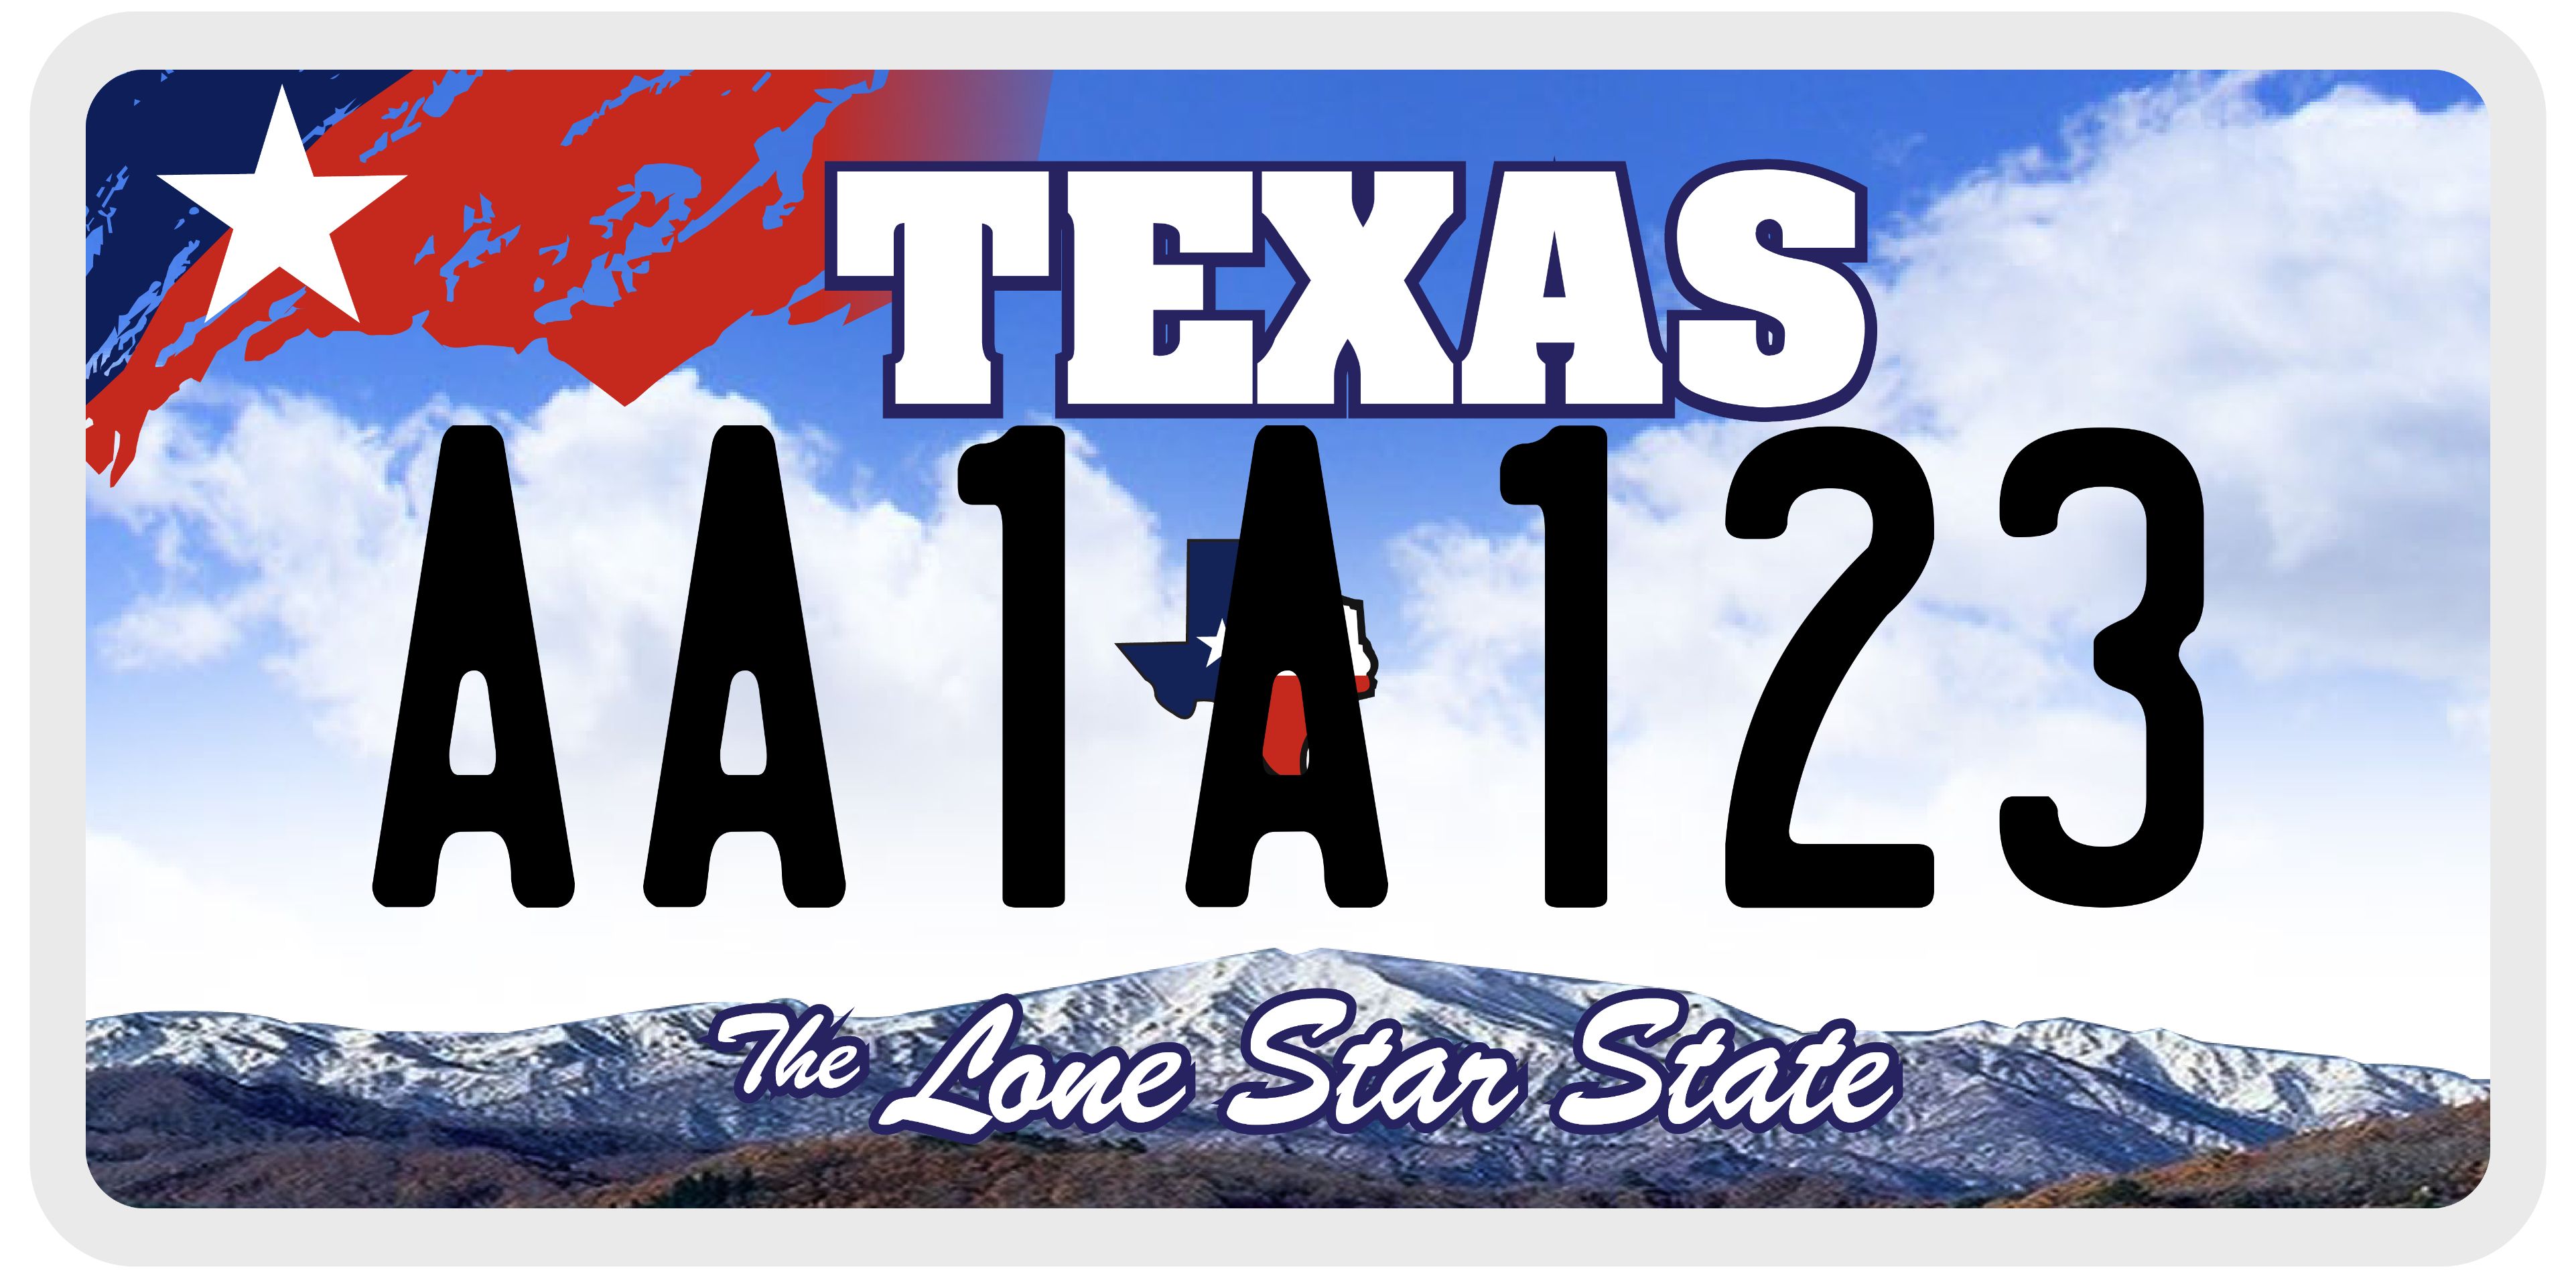 what does a standard texas license plate look like?